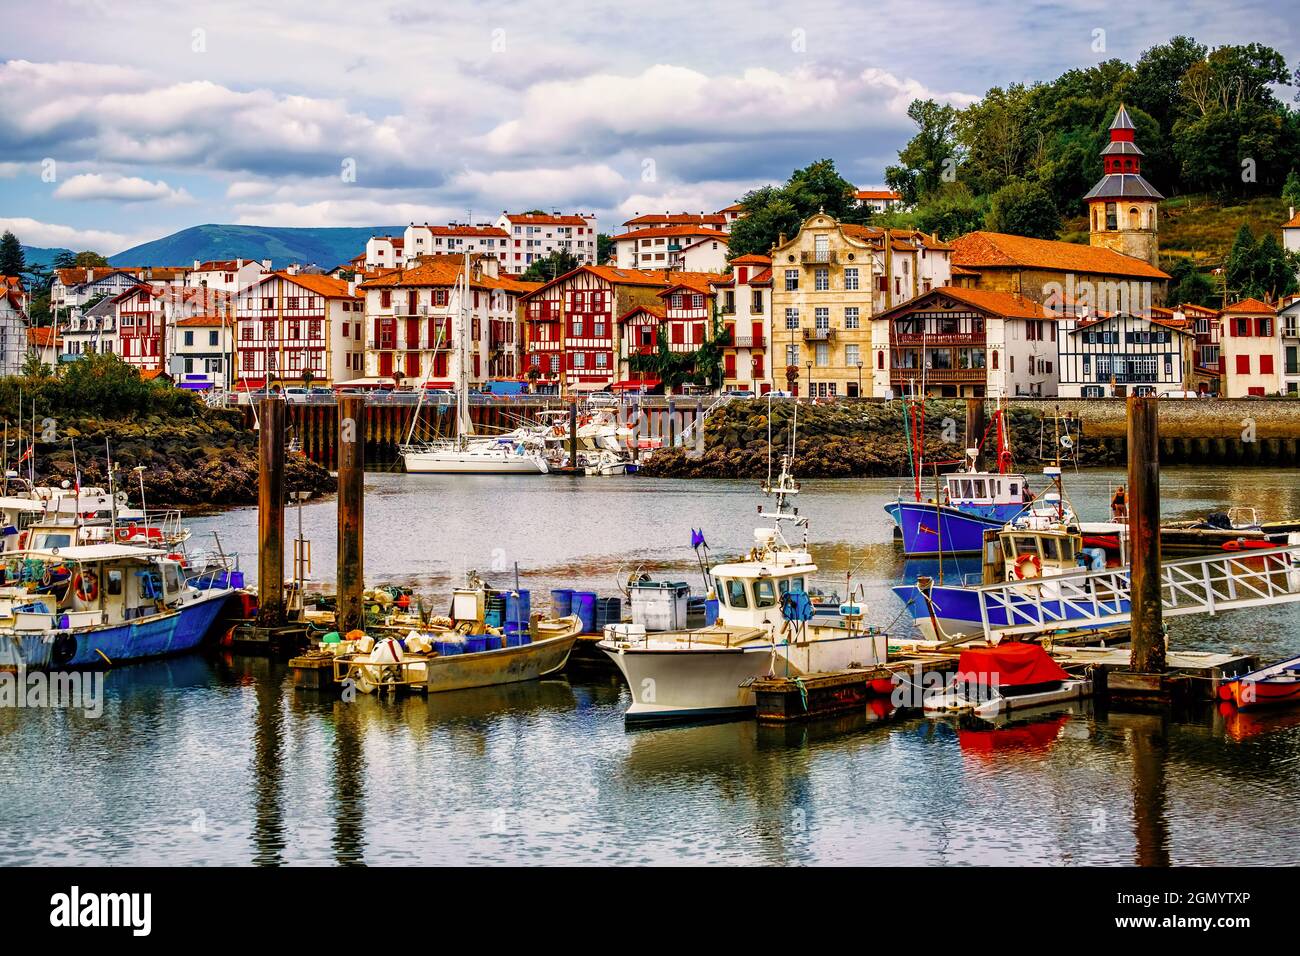 Colorful traditional basque houses in port of Saint-Jean-de-Luz Old Town, France Stock Photo